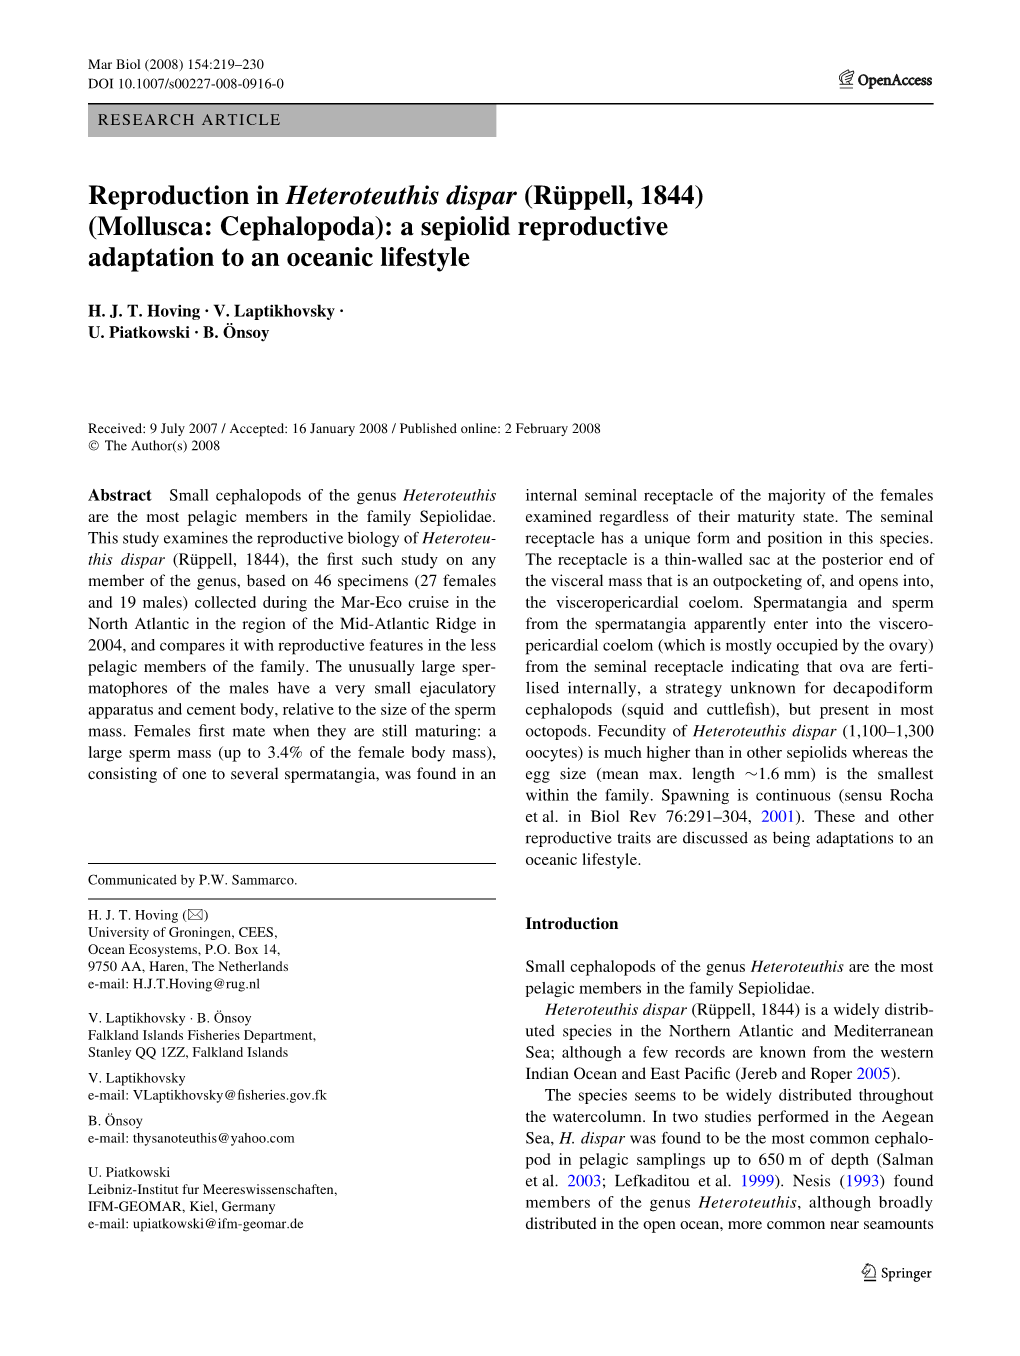 Reproduction in Heteroteuthis Dispar (Rüppell, 1844) (Mollusca: Cephalopoda): a Sepiolid Reproductive Adaptation to an Oceanic Lifestyle